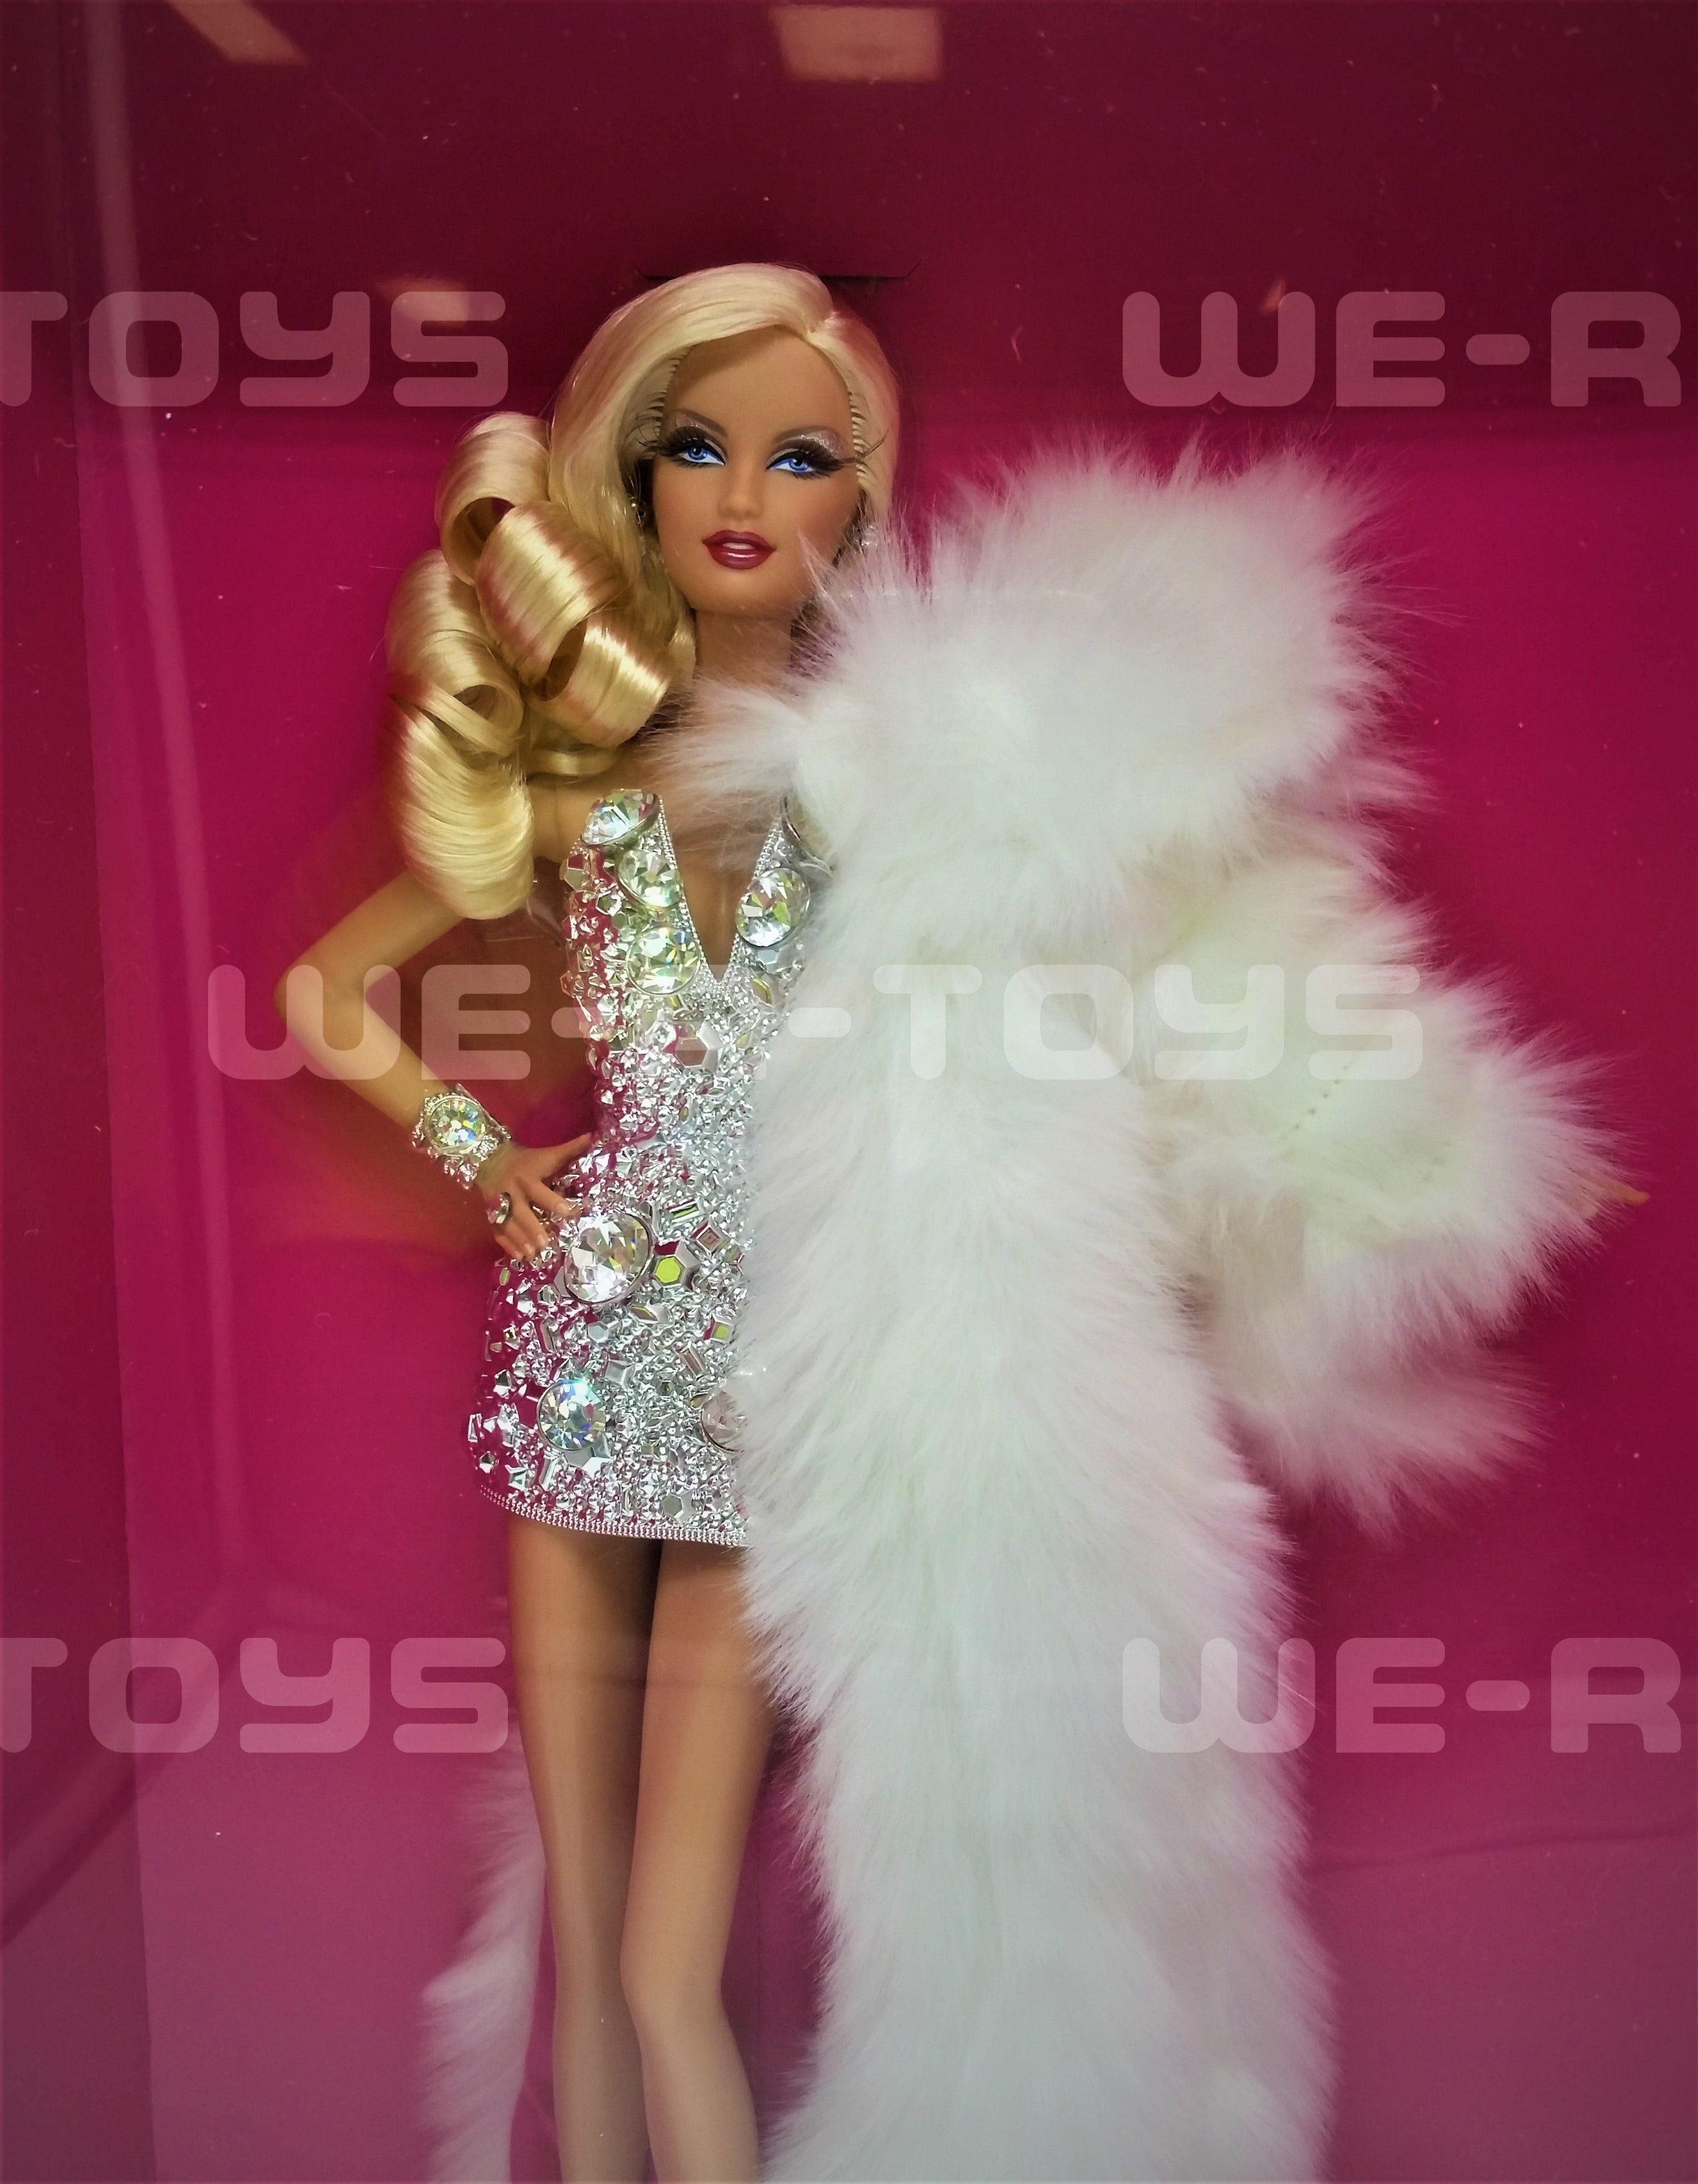 The Blonds Blond Diamond Barbie-Hunger Games – Barbies Collectors